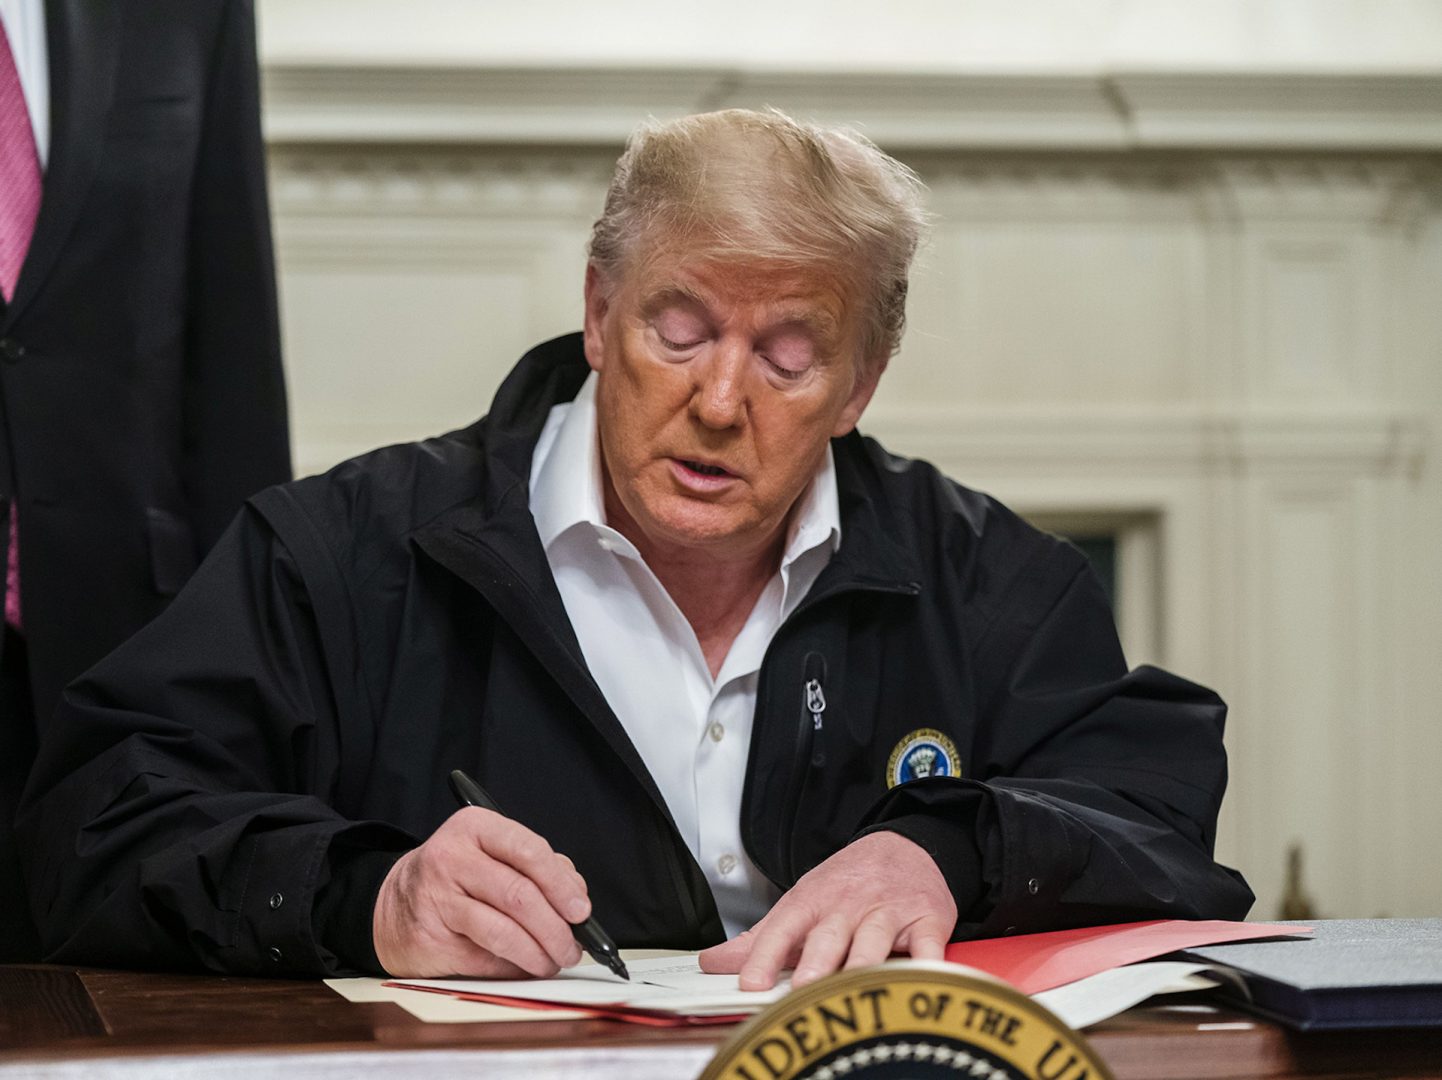 President Trump signs an $8.3 billion emergency spending bill in the White House Friday. That's significantly more than he originally requested from Congress.